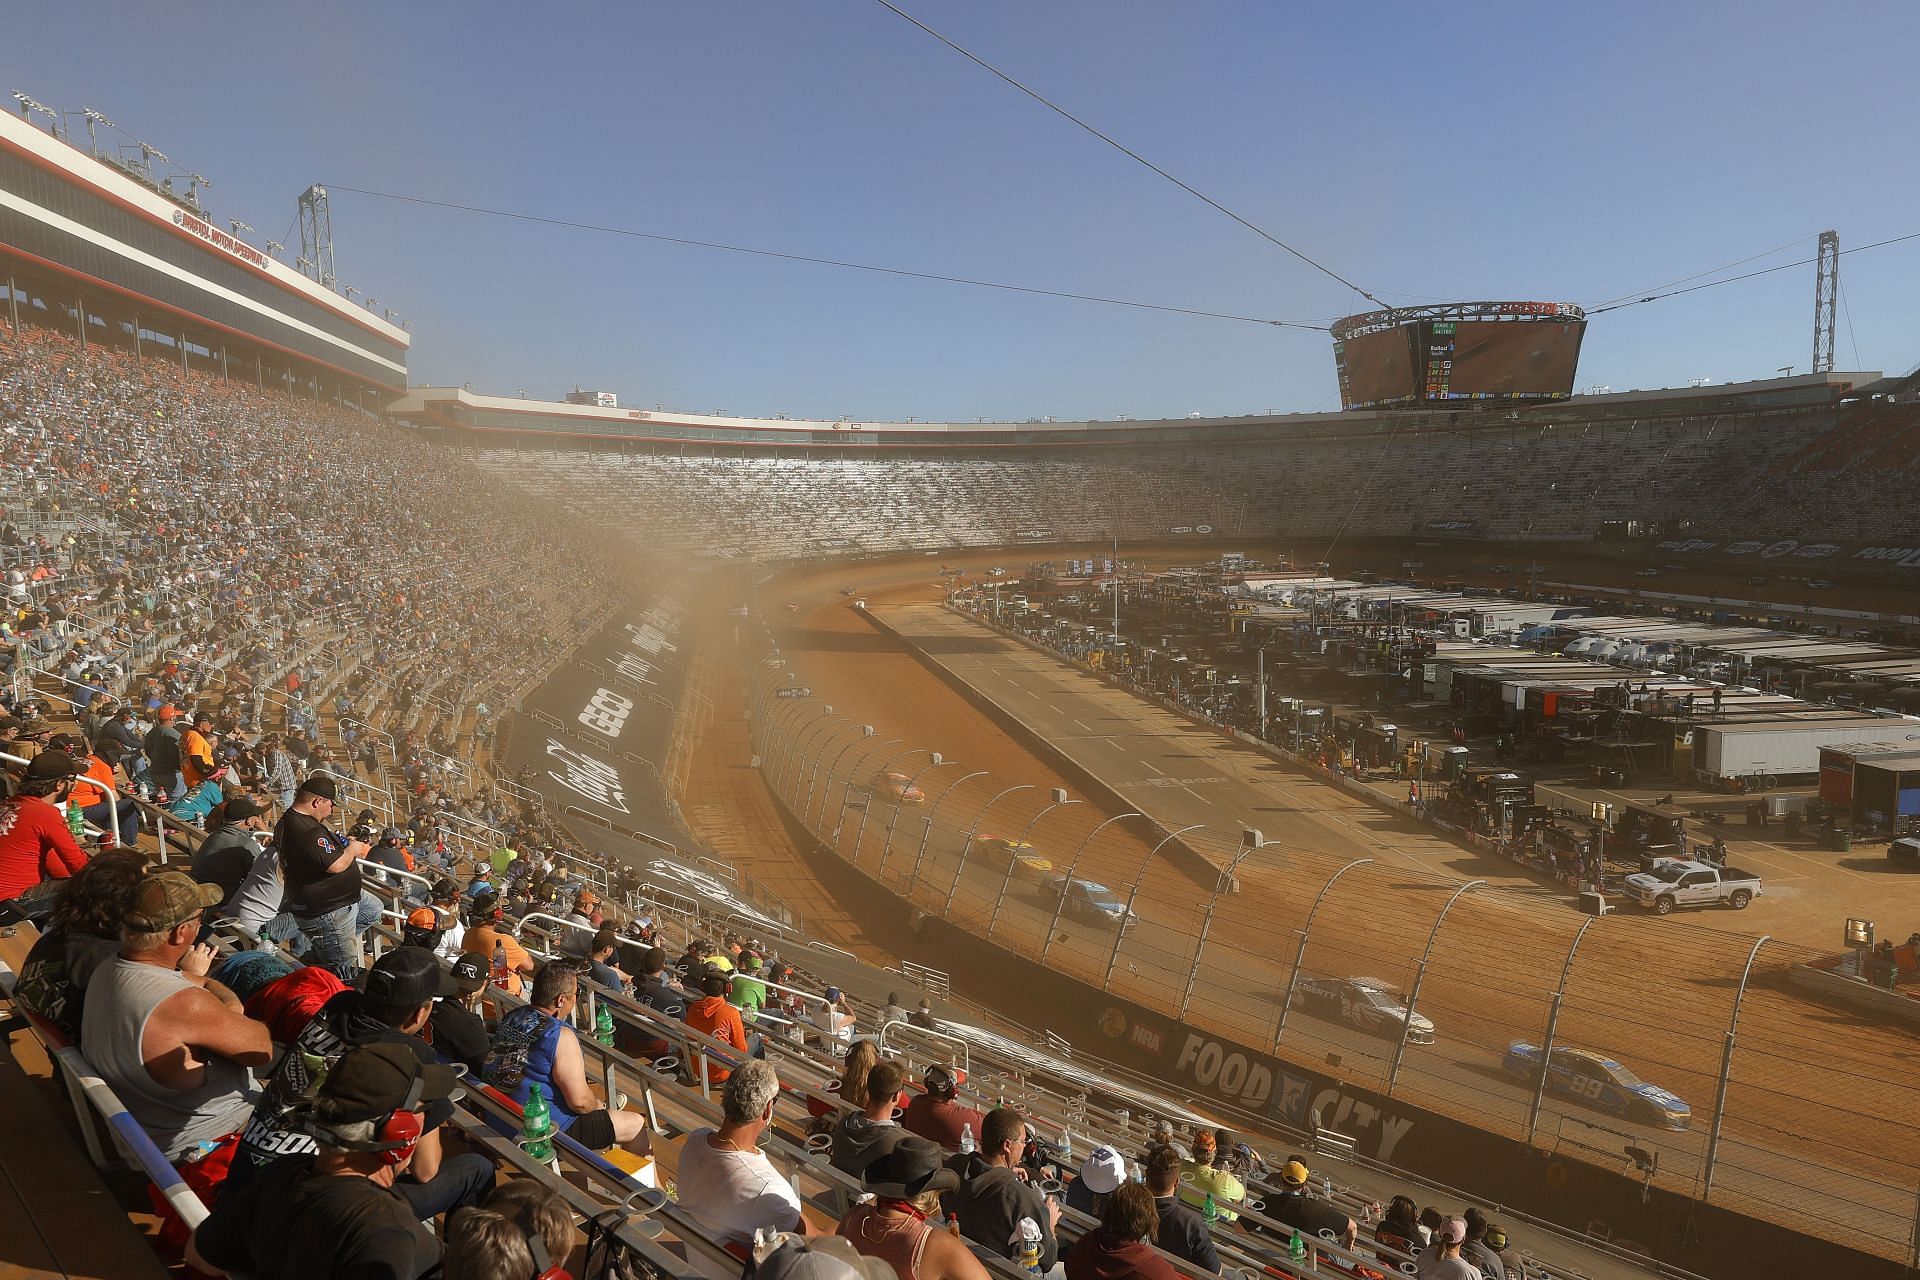 A general view of the 2021 NASCAR Cup Series Food City Dirt Race at Bristol Motor Speedway in Tennessee. (Photo by Jared C. Tilton/Getty Images)